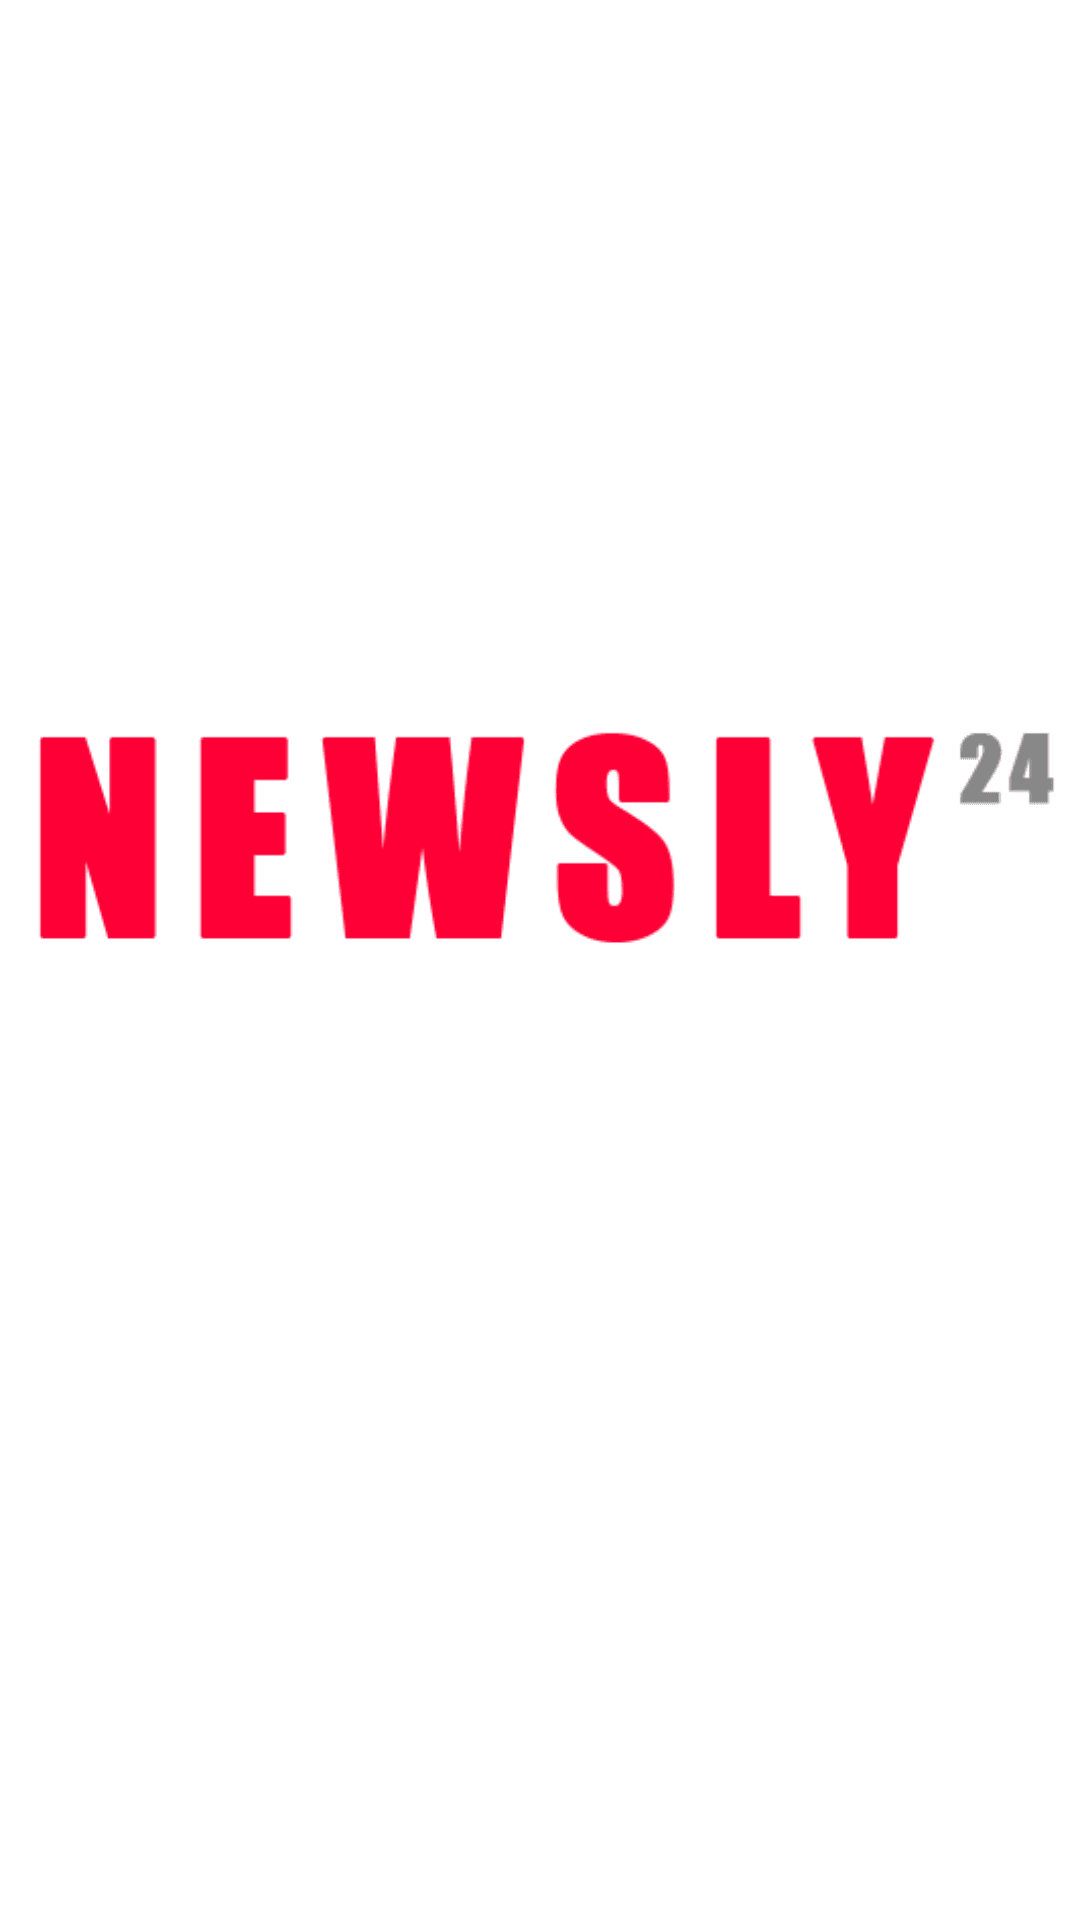 660/Newsly24.png